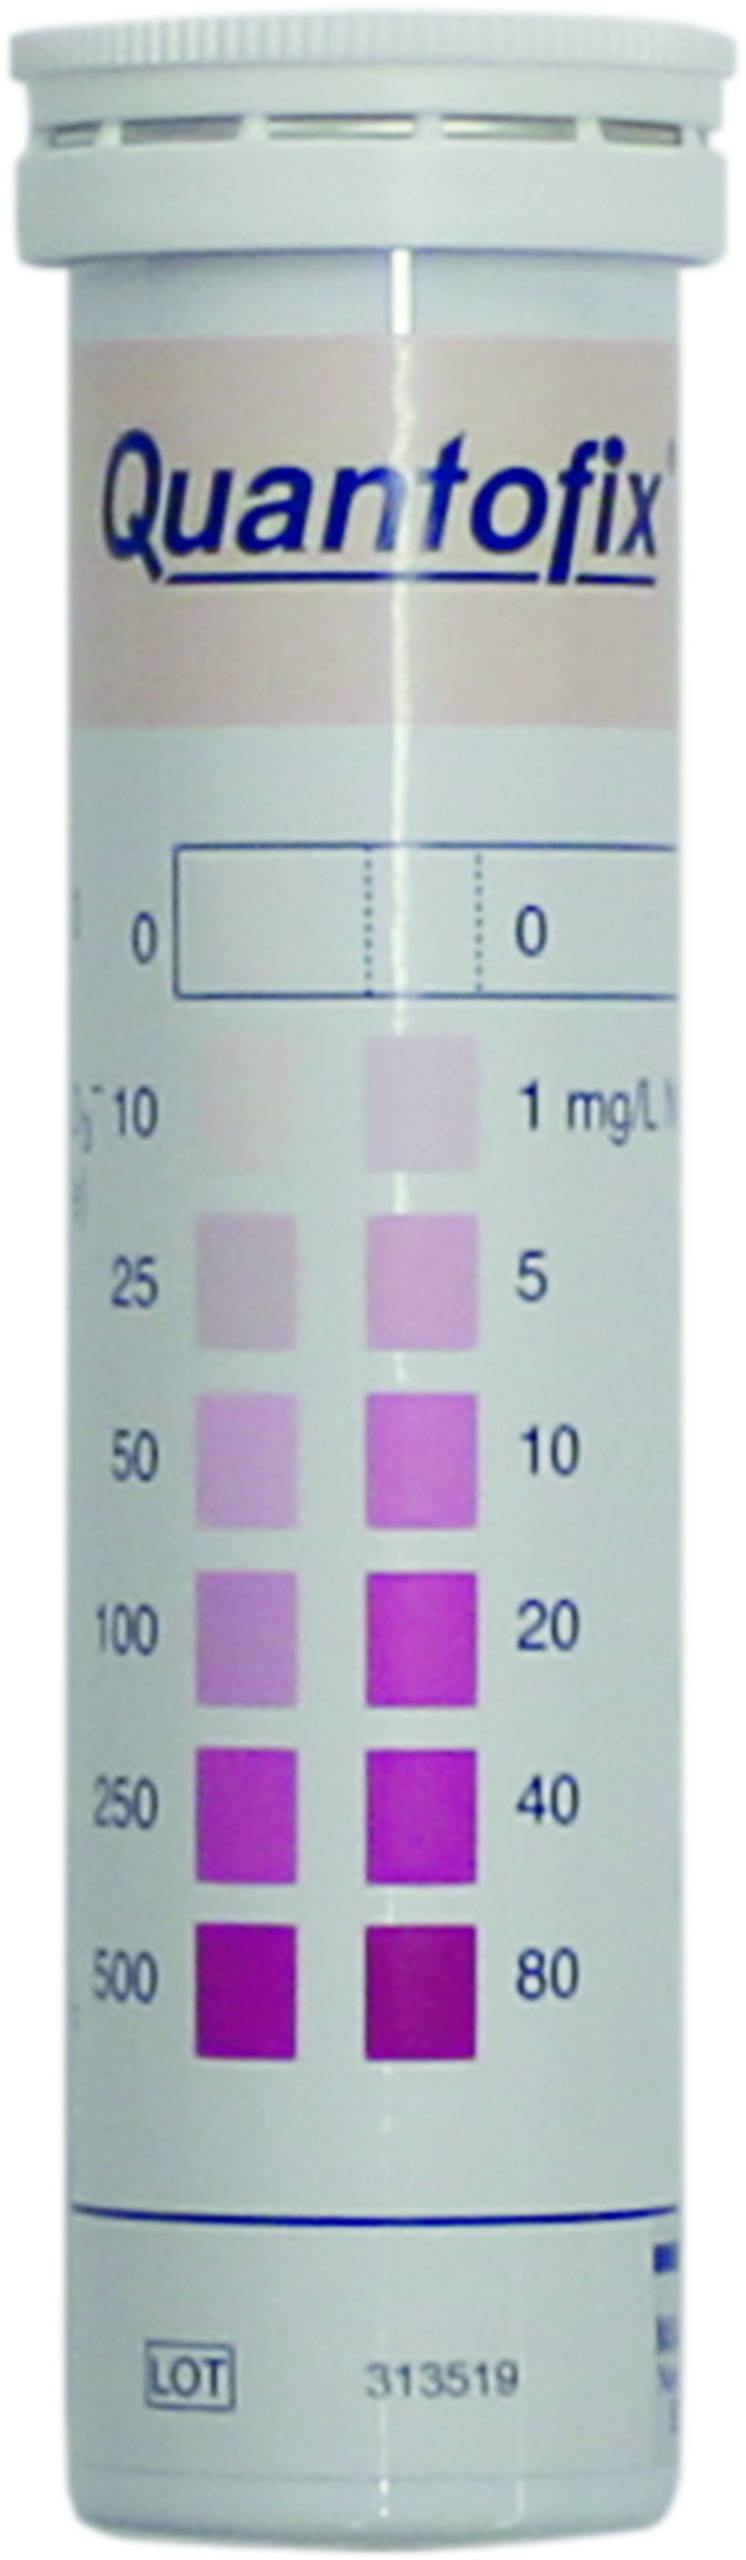 JUDO Nitrate test strips for determination of nitrate content